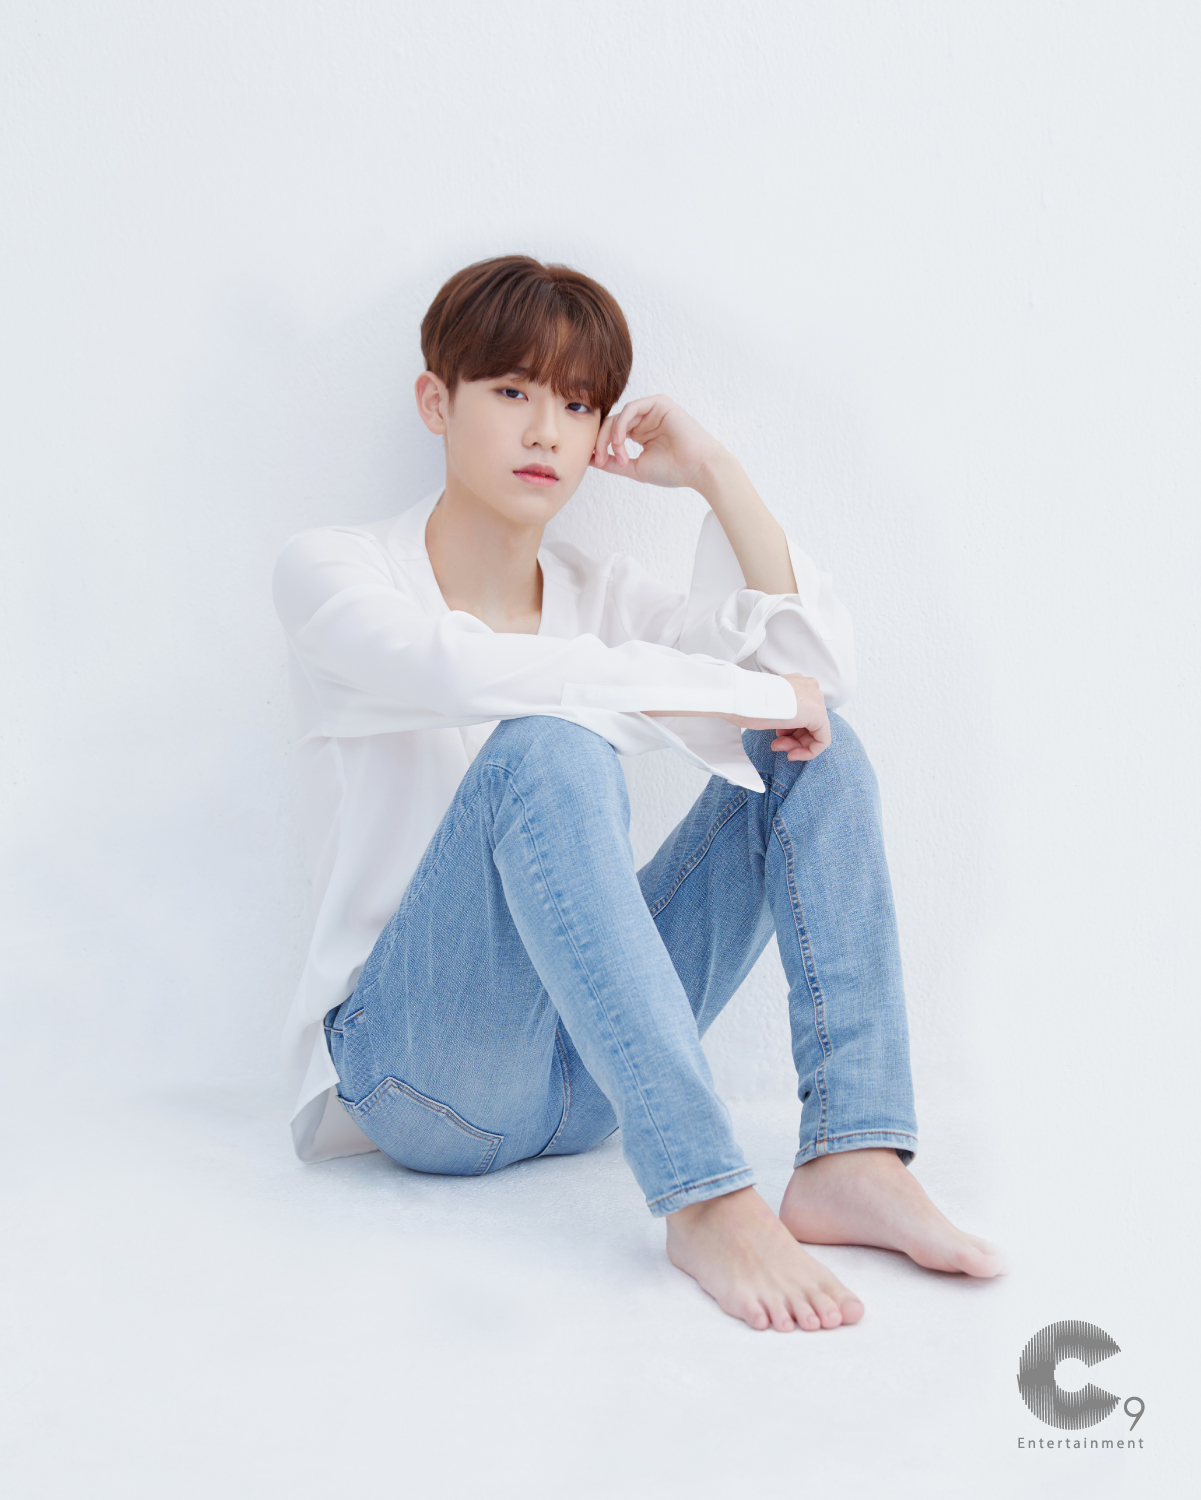 produce-x-101-8-keum-donghyun-revealed-as-first-member-of-new-boy-group-c9rookies